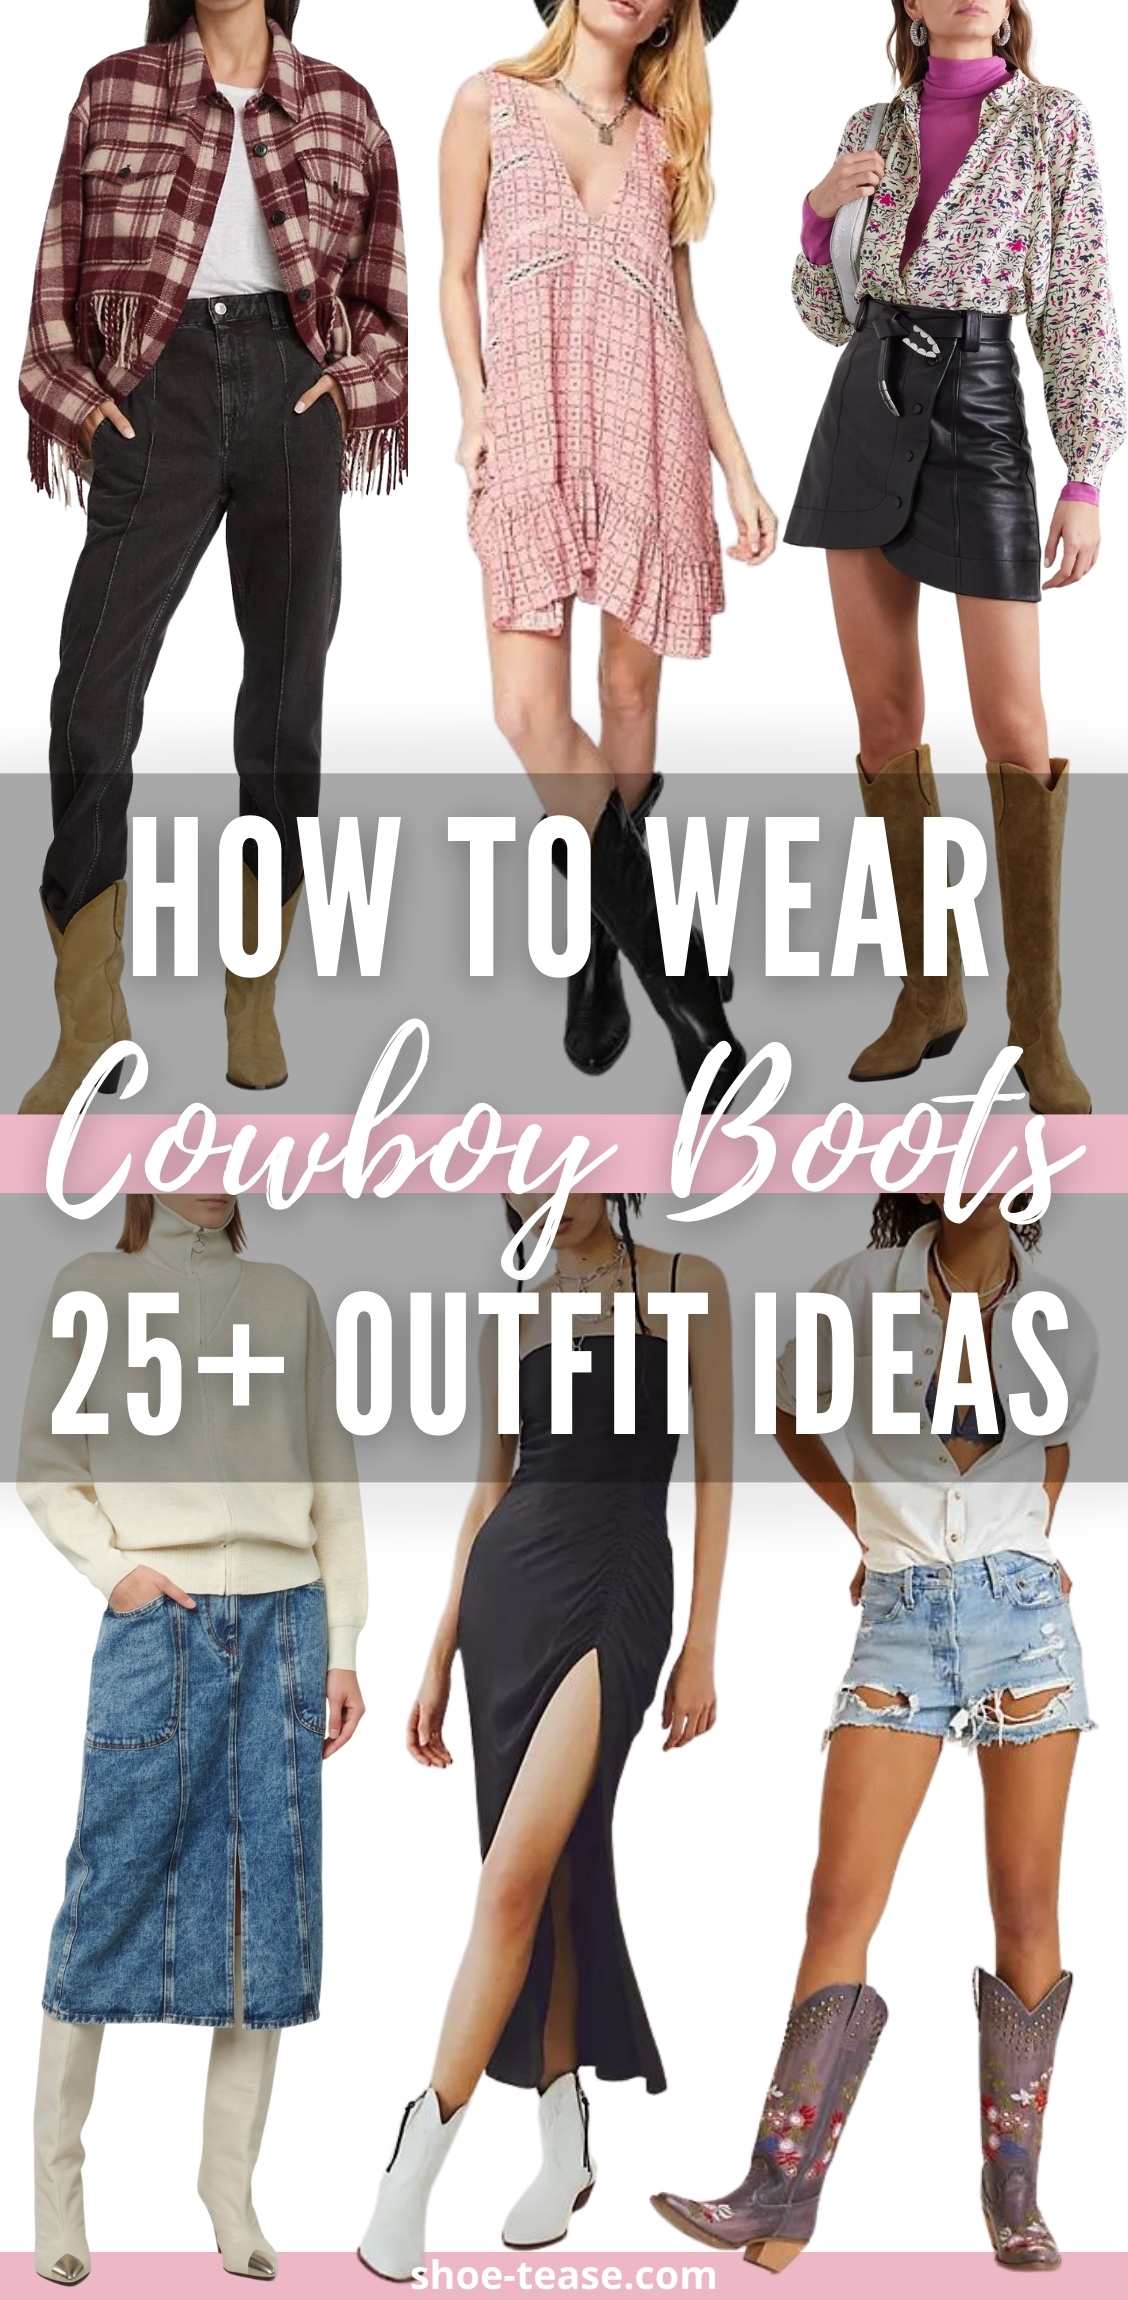 50 Fashionable Cowboy Boots Outfit Ideas To Make A Bold Statement | vlr ...